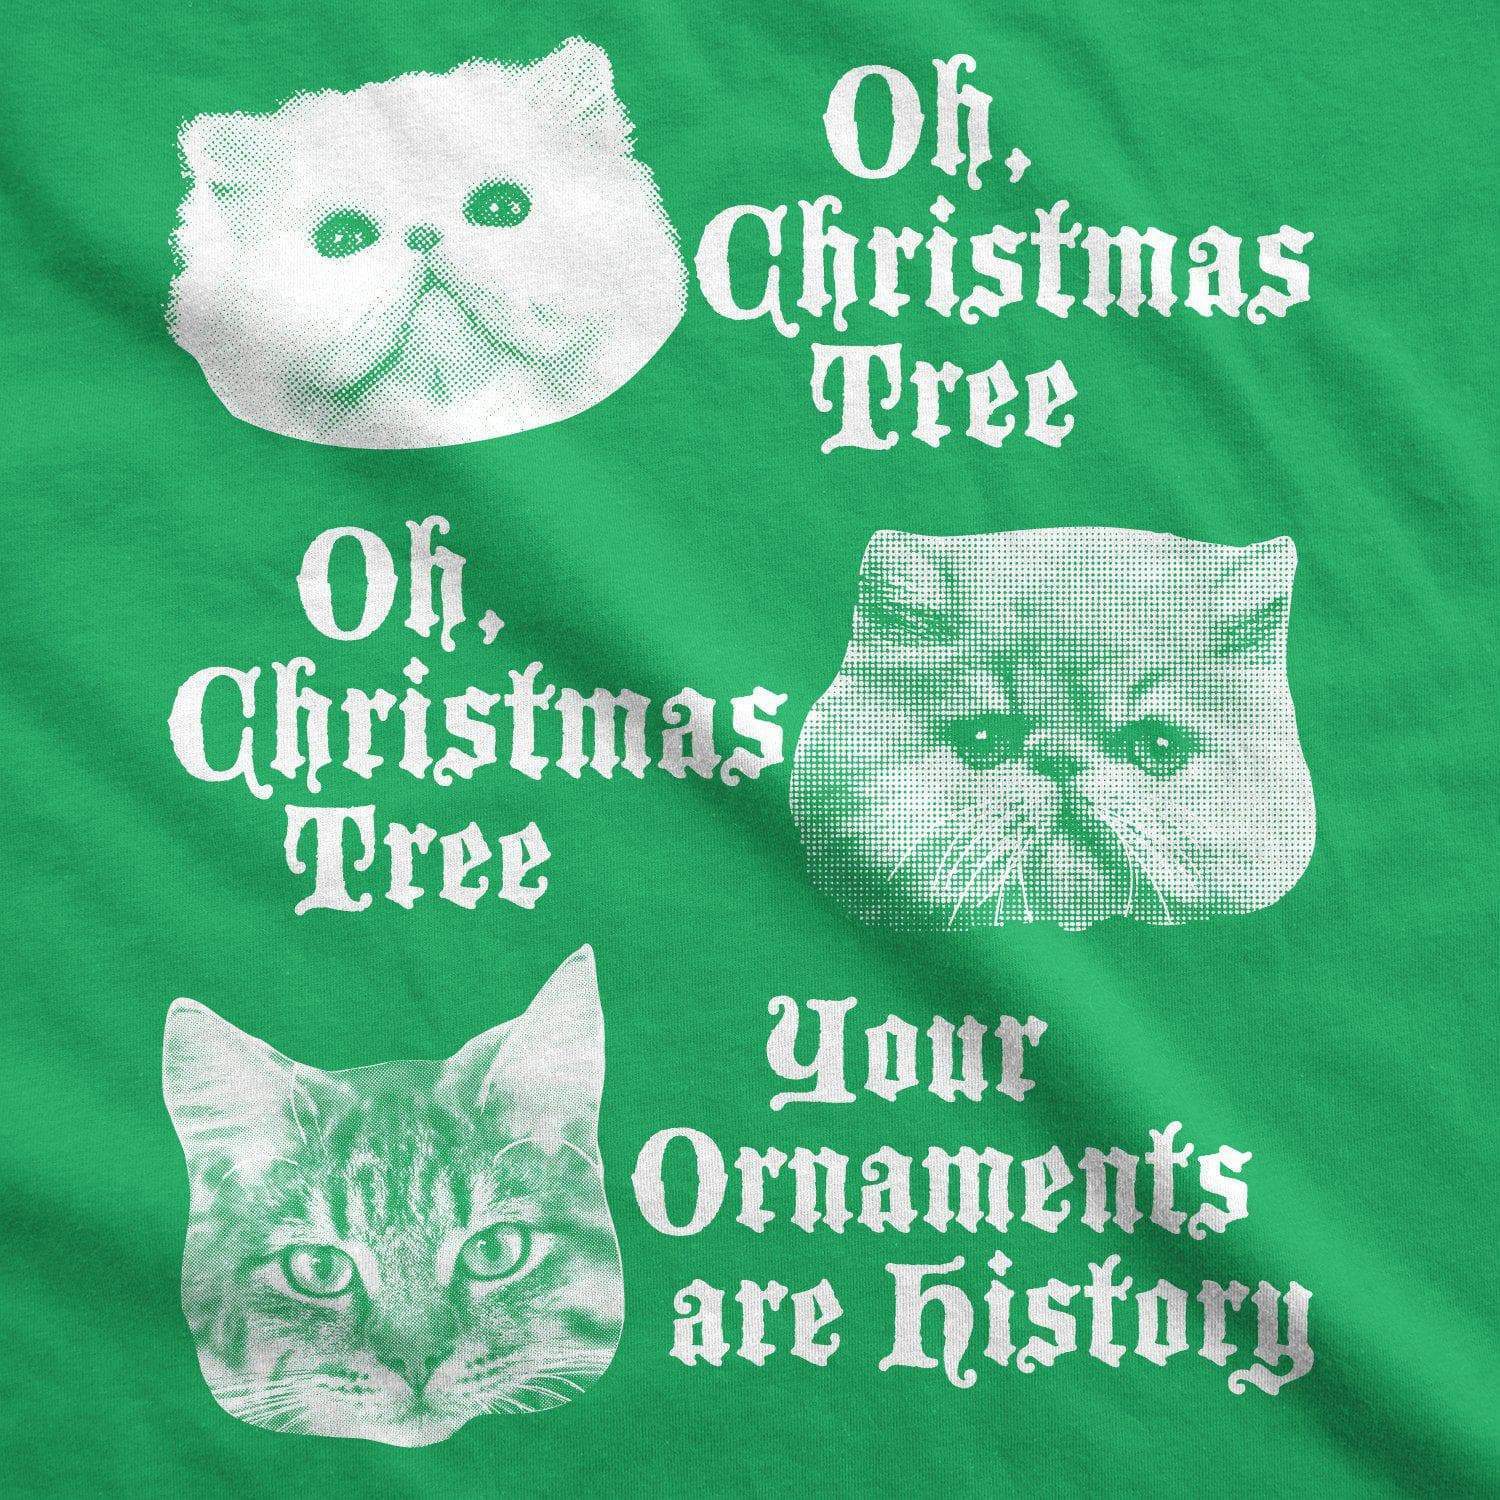 Oh Christmas Tree Your Ornaments Are History Men's Tshirt - Crazy Dog T-Shirts